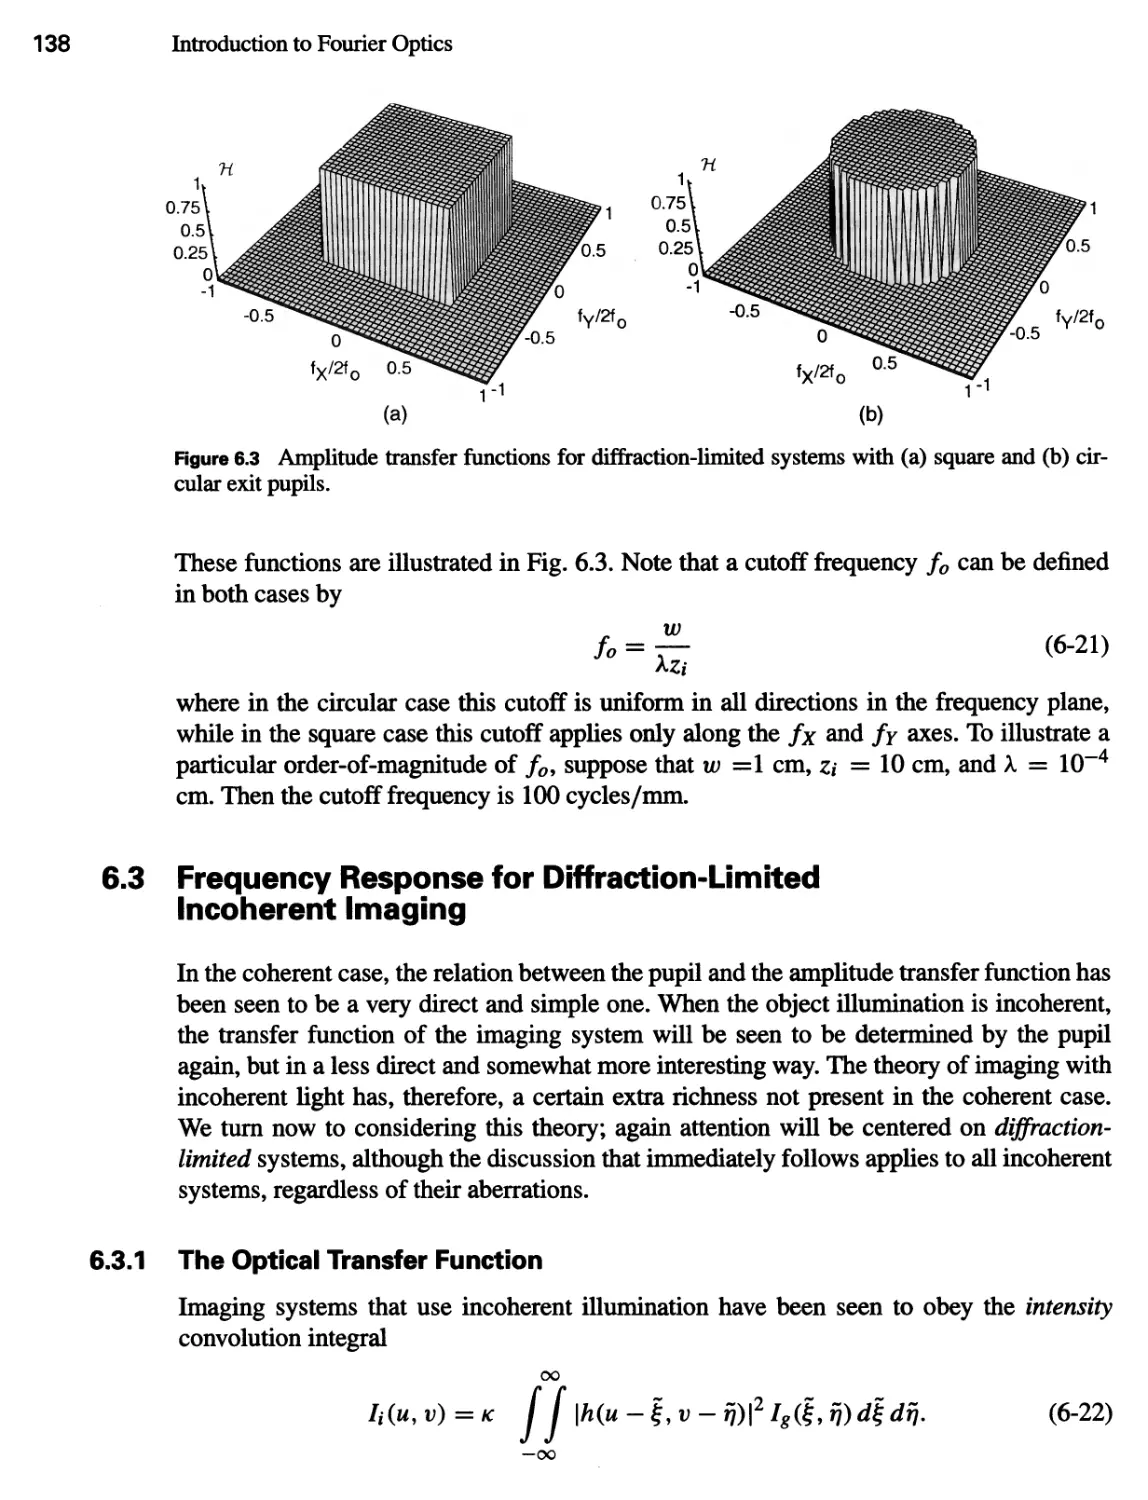 6.3 Frequency Response for Diffraction-Limited Incoherent Imaging 138